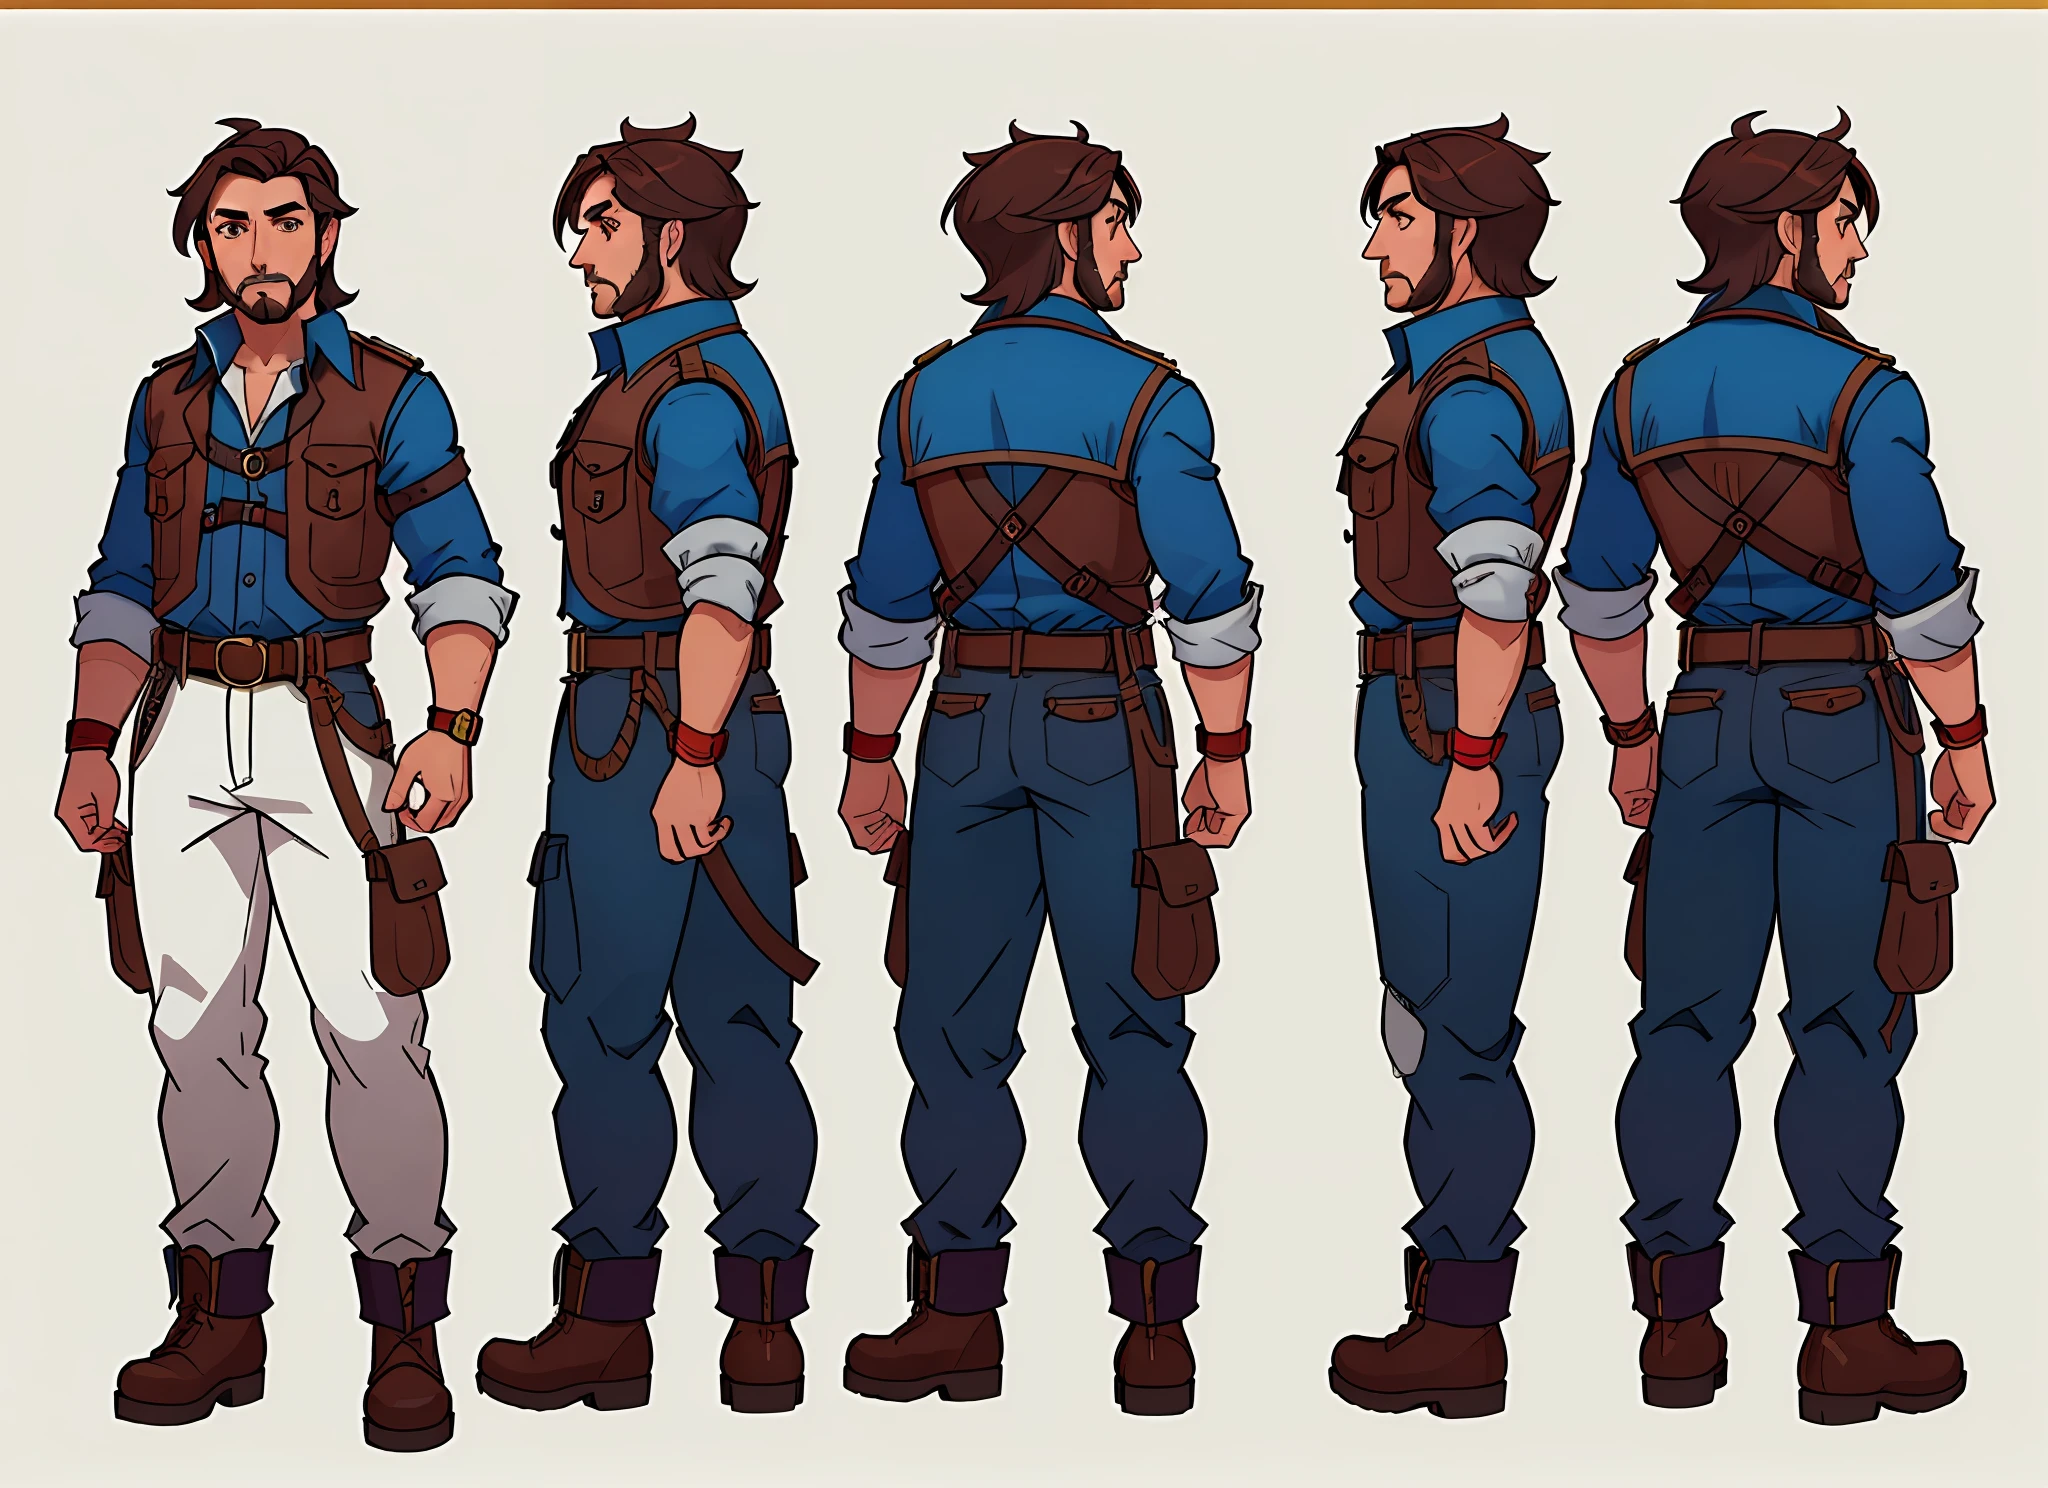 ((Character design Sheet, Same character, forehead, side, derriere)) character design,  comic style, adventurous man, disfraz de Indiana Jones, expert high detail concept art, steampunk design, steampunk style vest details, intricate details, Boots, pants, masculine, belt with tools,  rostro muy detalside. multiple views of the same character in the same outfit (15Charturn_longCap_d: .5), art by smoose2, analogue style, Modelshoot style